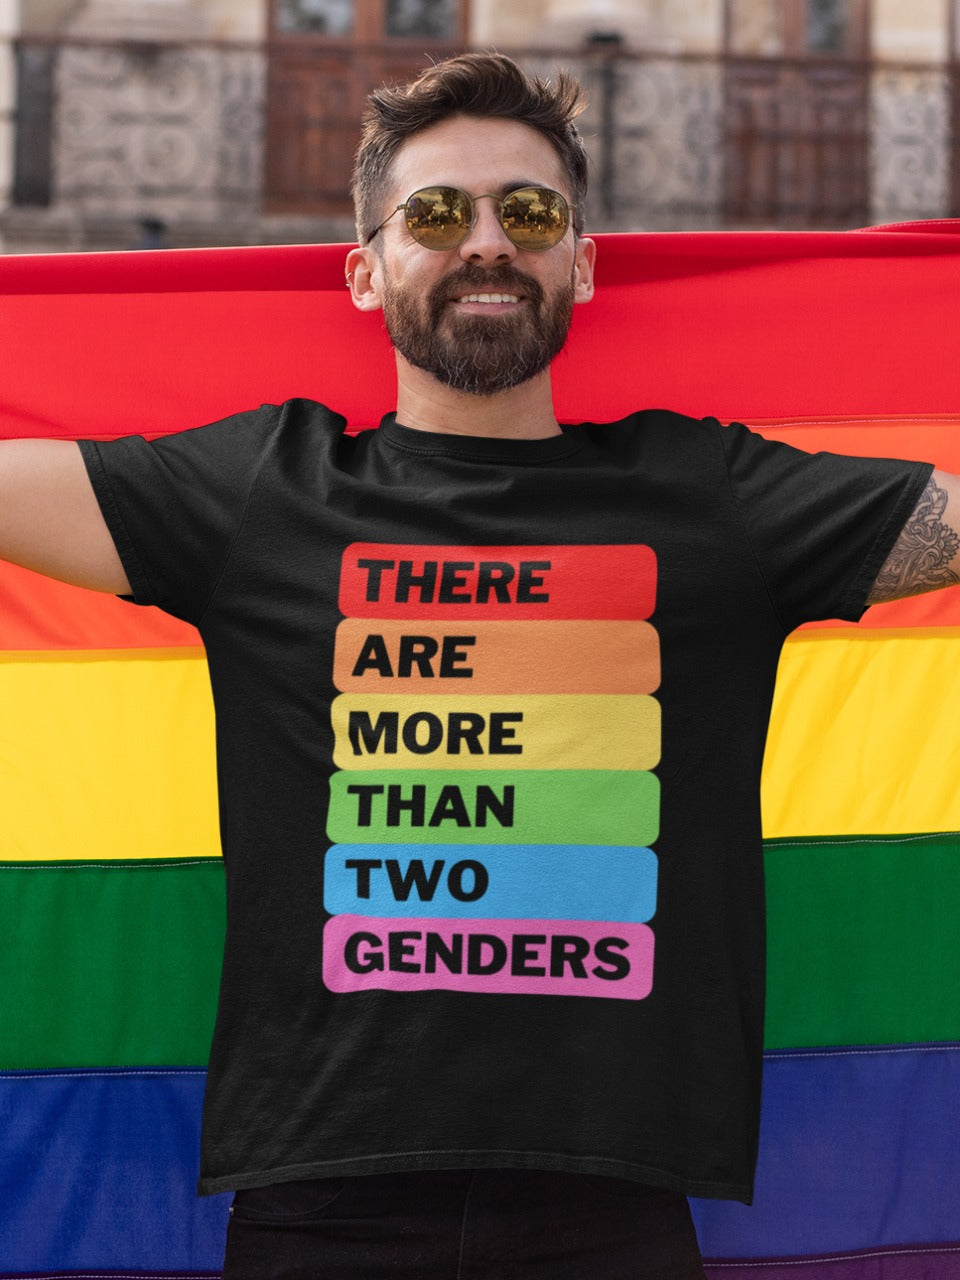 person wearing goggles and holding a rainbow flag is wearing a black tee with there are more than two genders written on it in rainbow palette